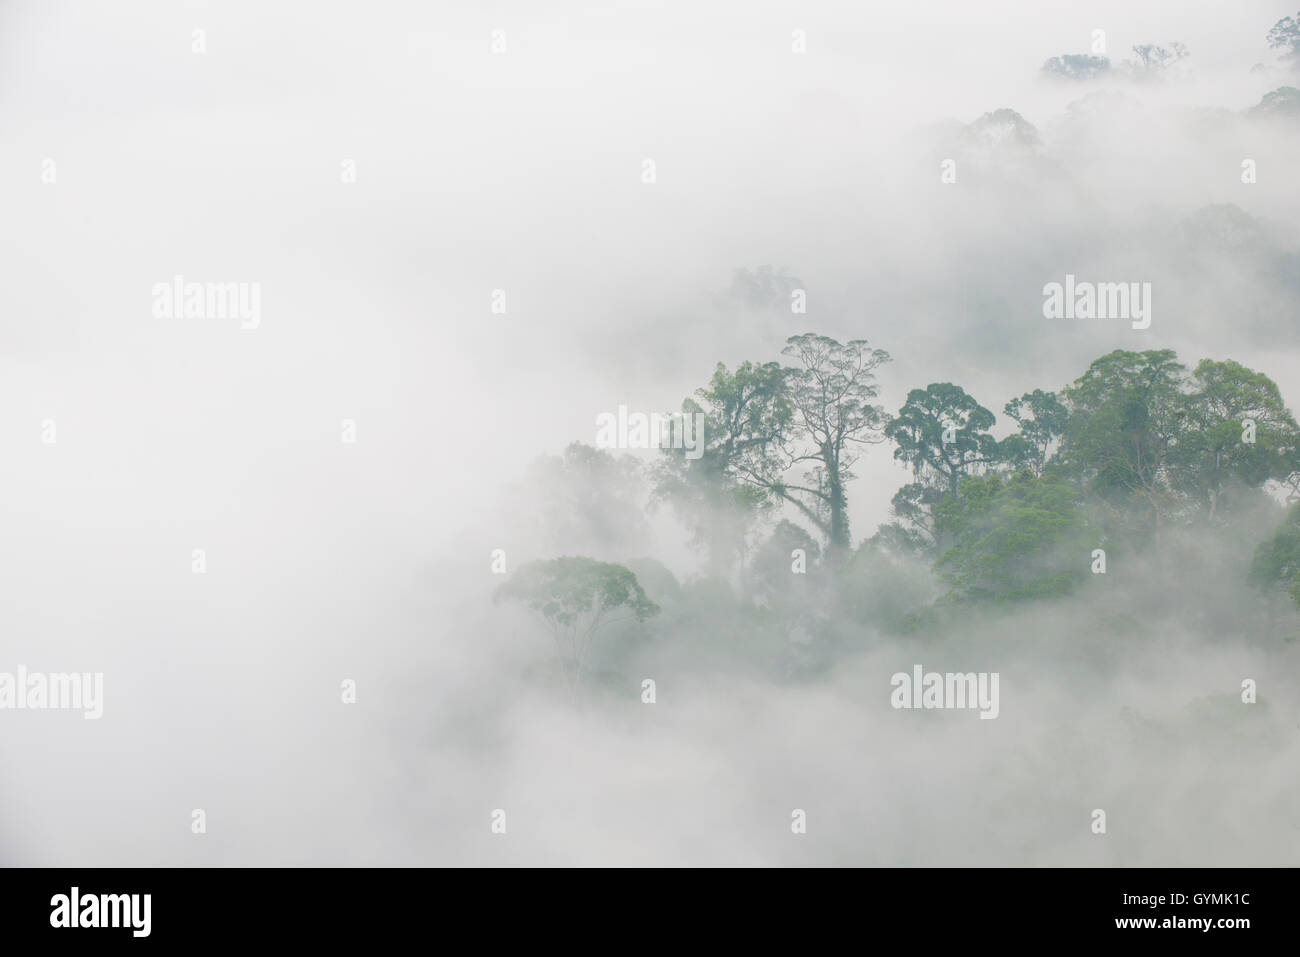 Tropical Rainforest  with trees appearing through early morning mist. Danum Valley, Sabah, Borneo Stock Photo